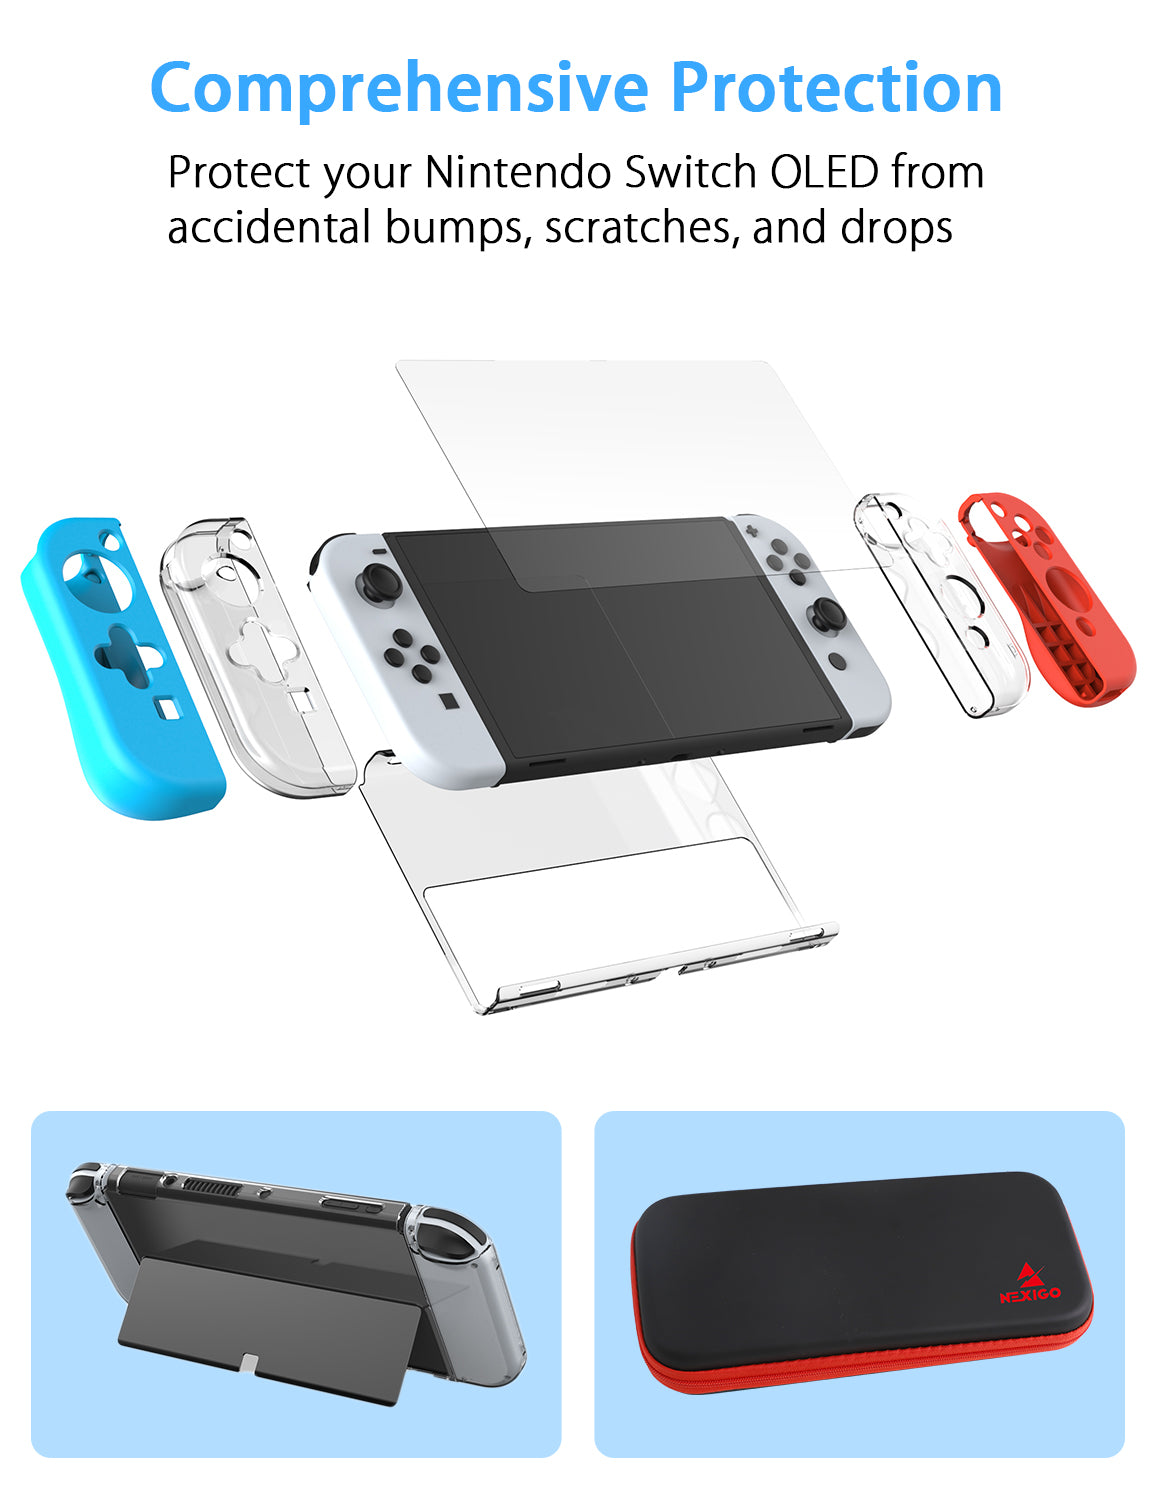 This carrying case with accessories protects your Nintendo Switch OLED from accidents.